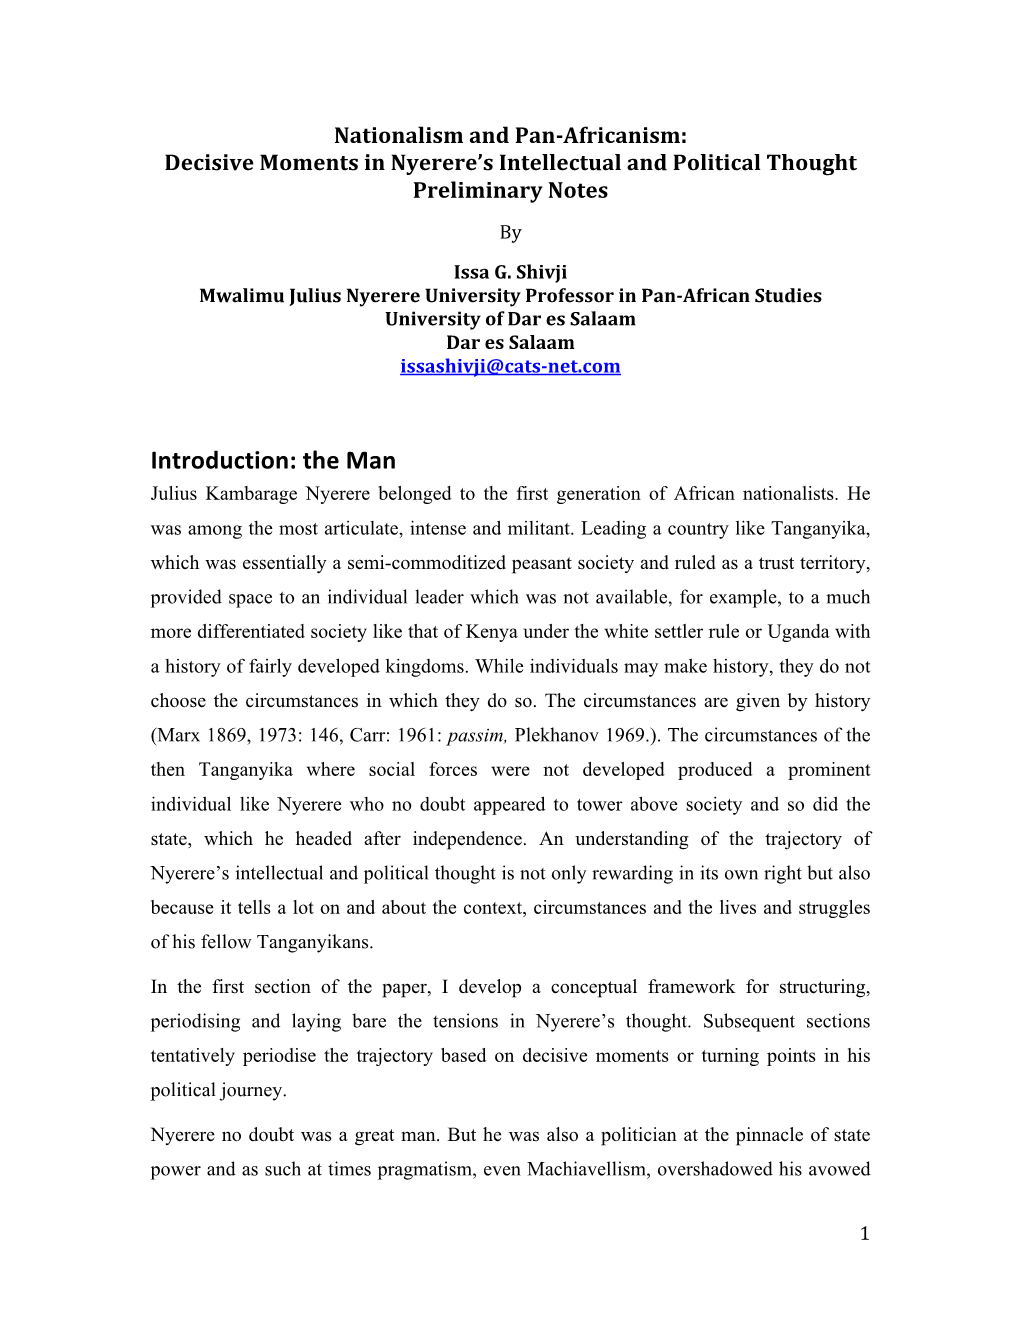 Nationalism and Pan-Africanism: Decisive Moments in Nyerere’S Intellectual and Political Thought Preliminary Notes